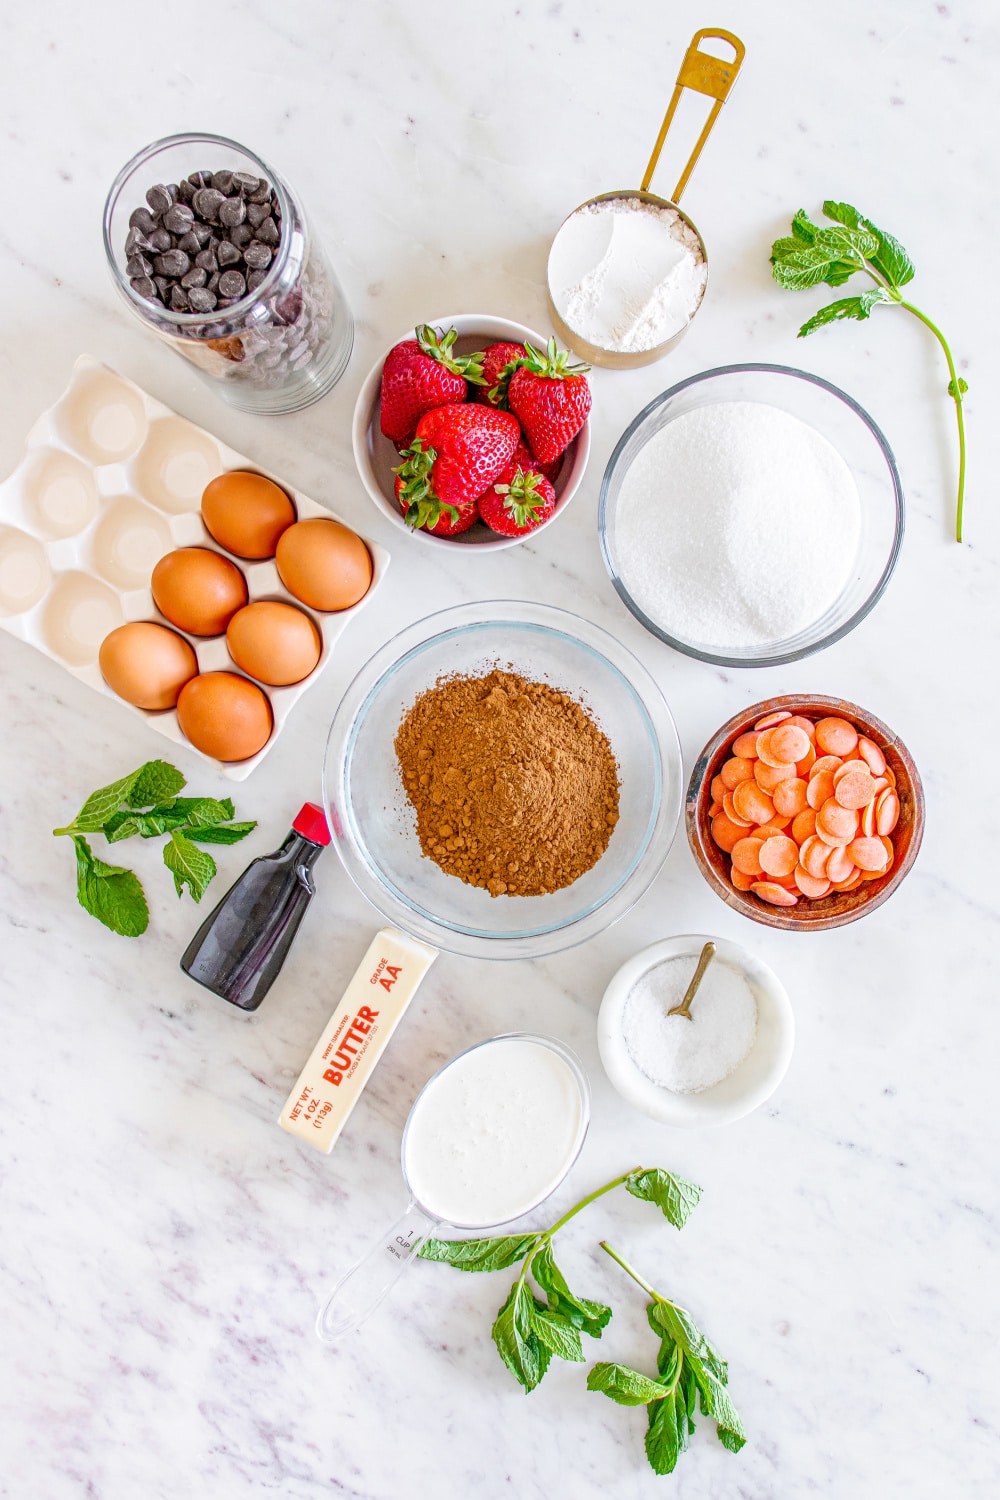 The ingredients needed to make this recipe measured and presented on a white marble countertop.